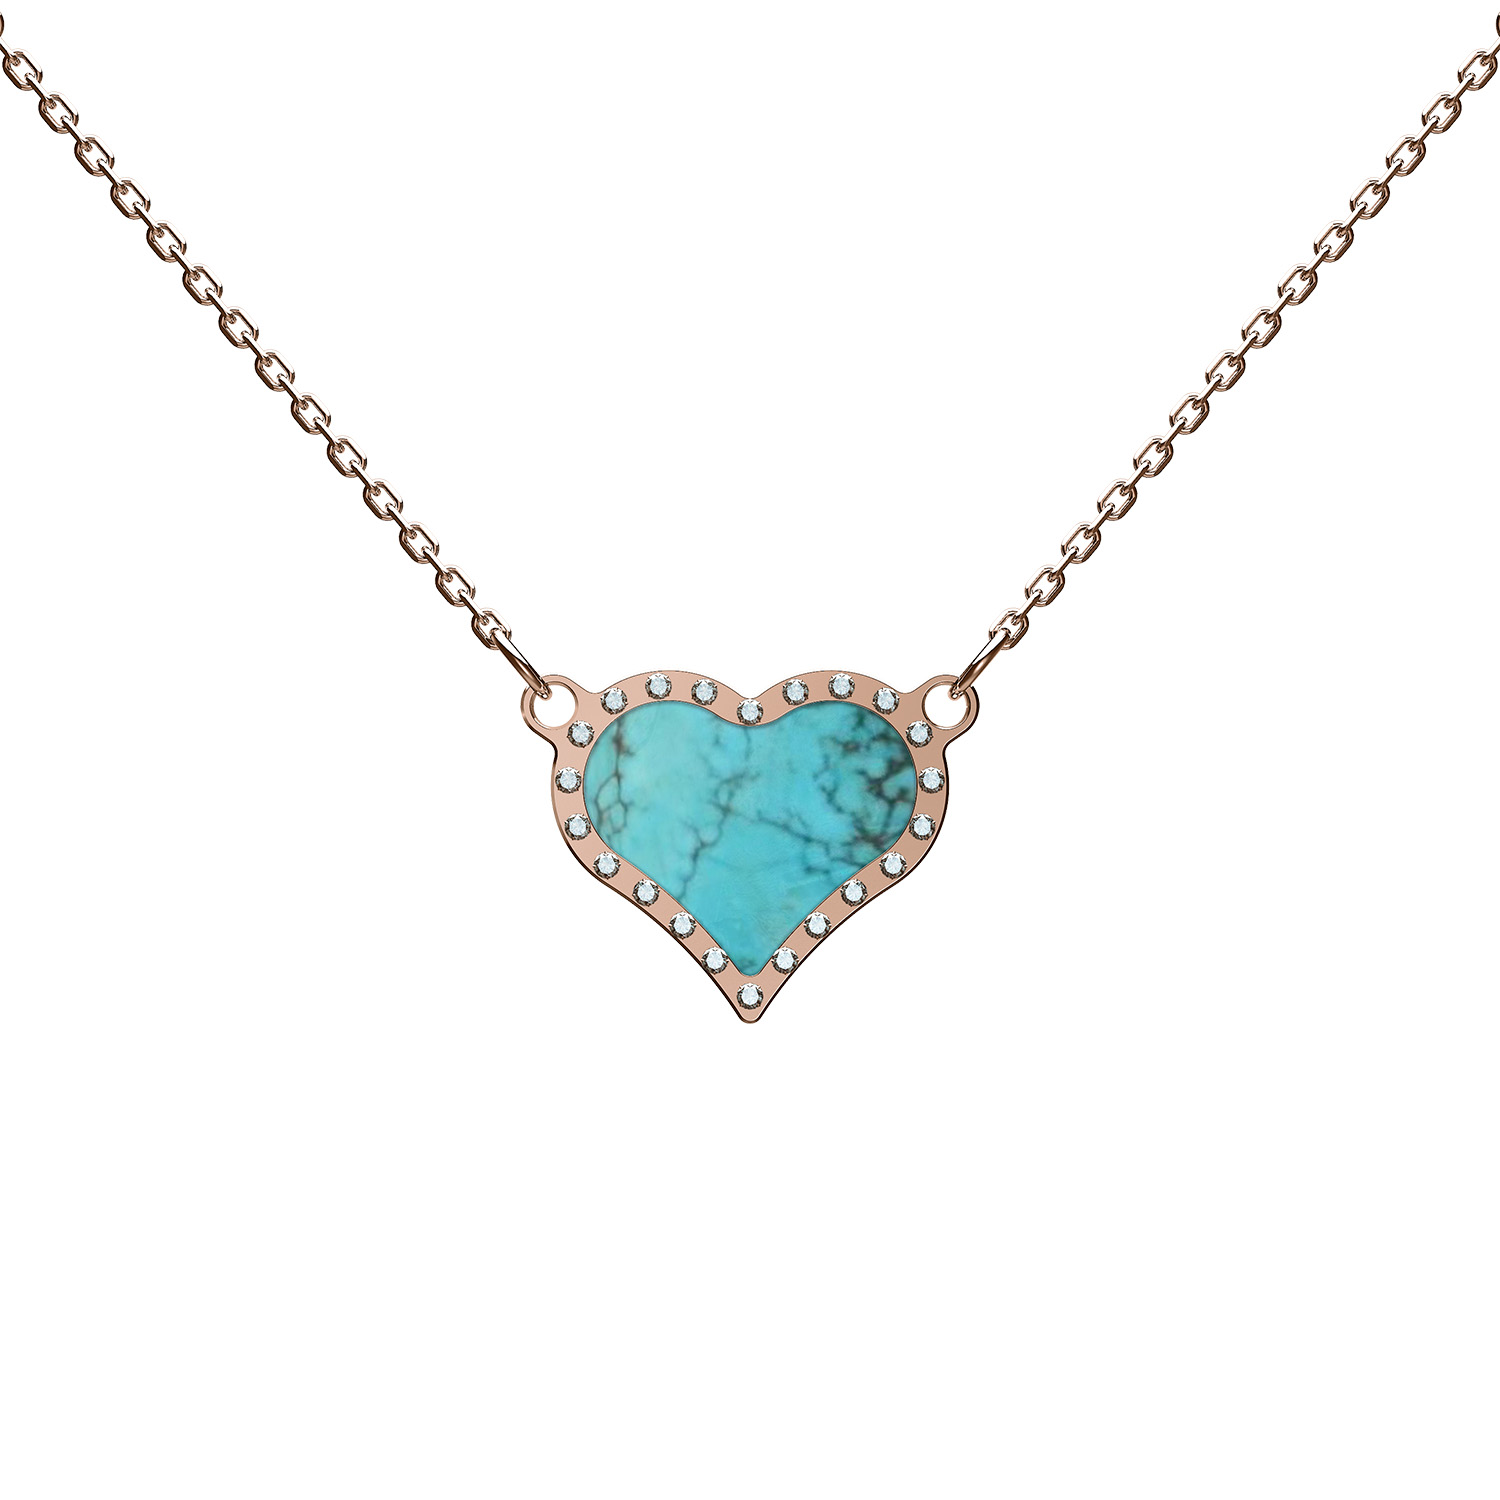 HEART NECKLACE PINK GOLD AND DIAMONDS_Turquoise_2175